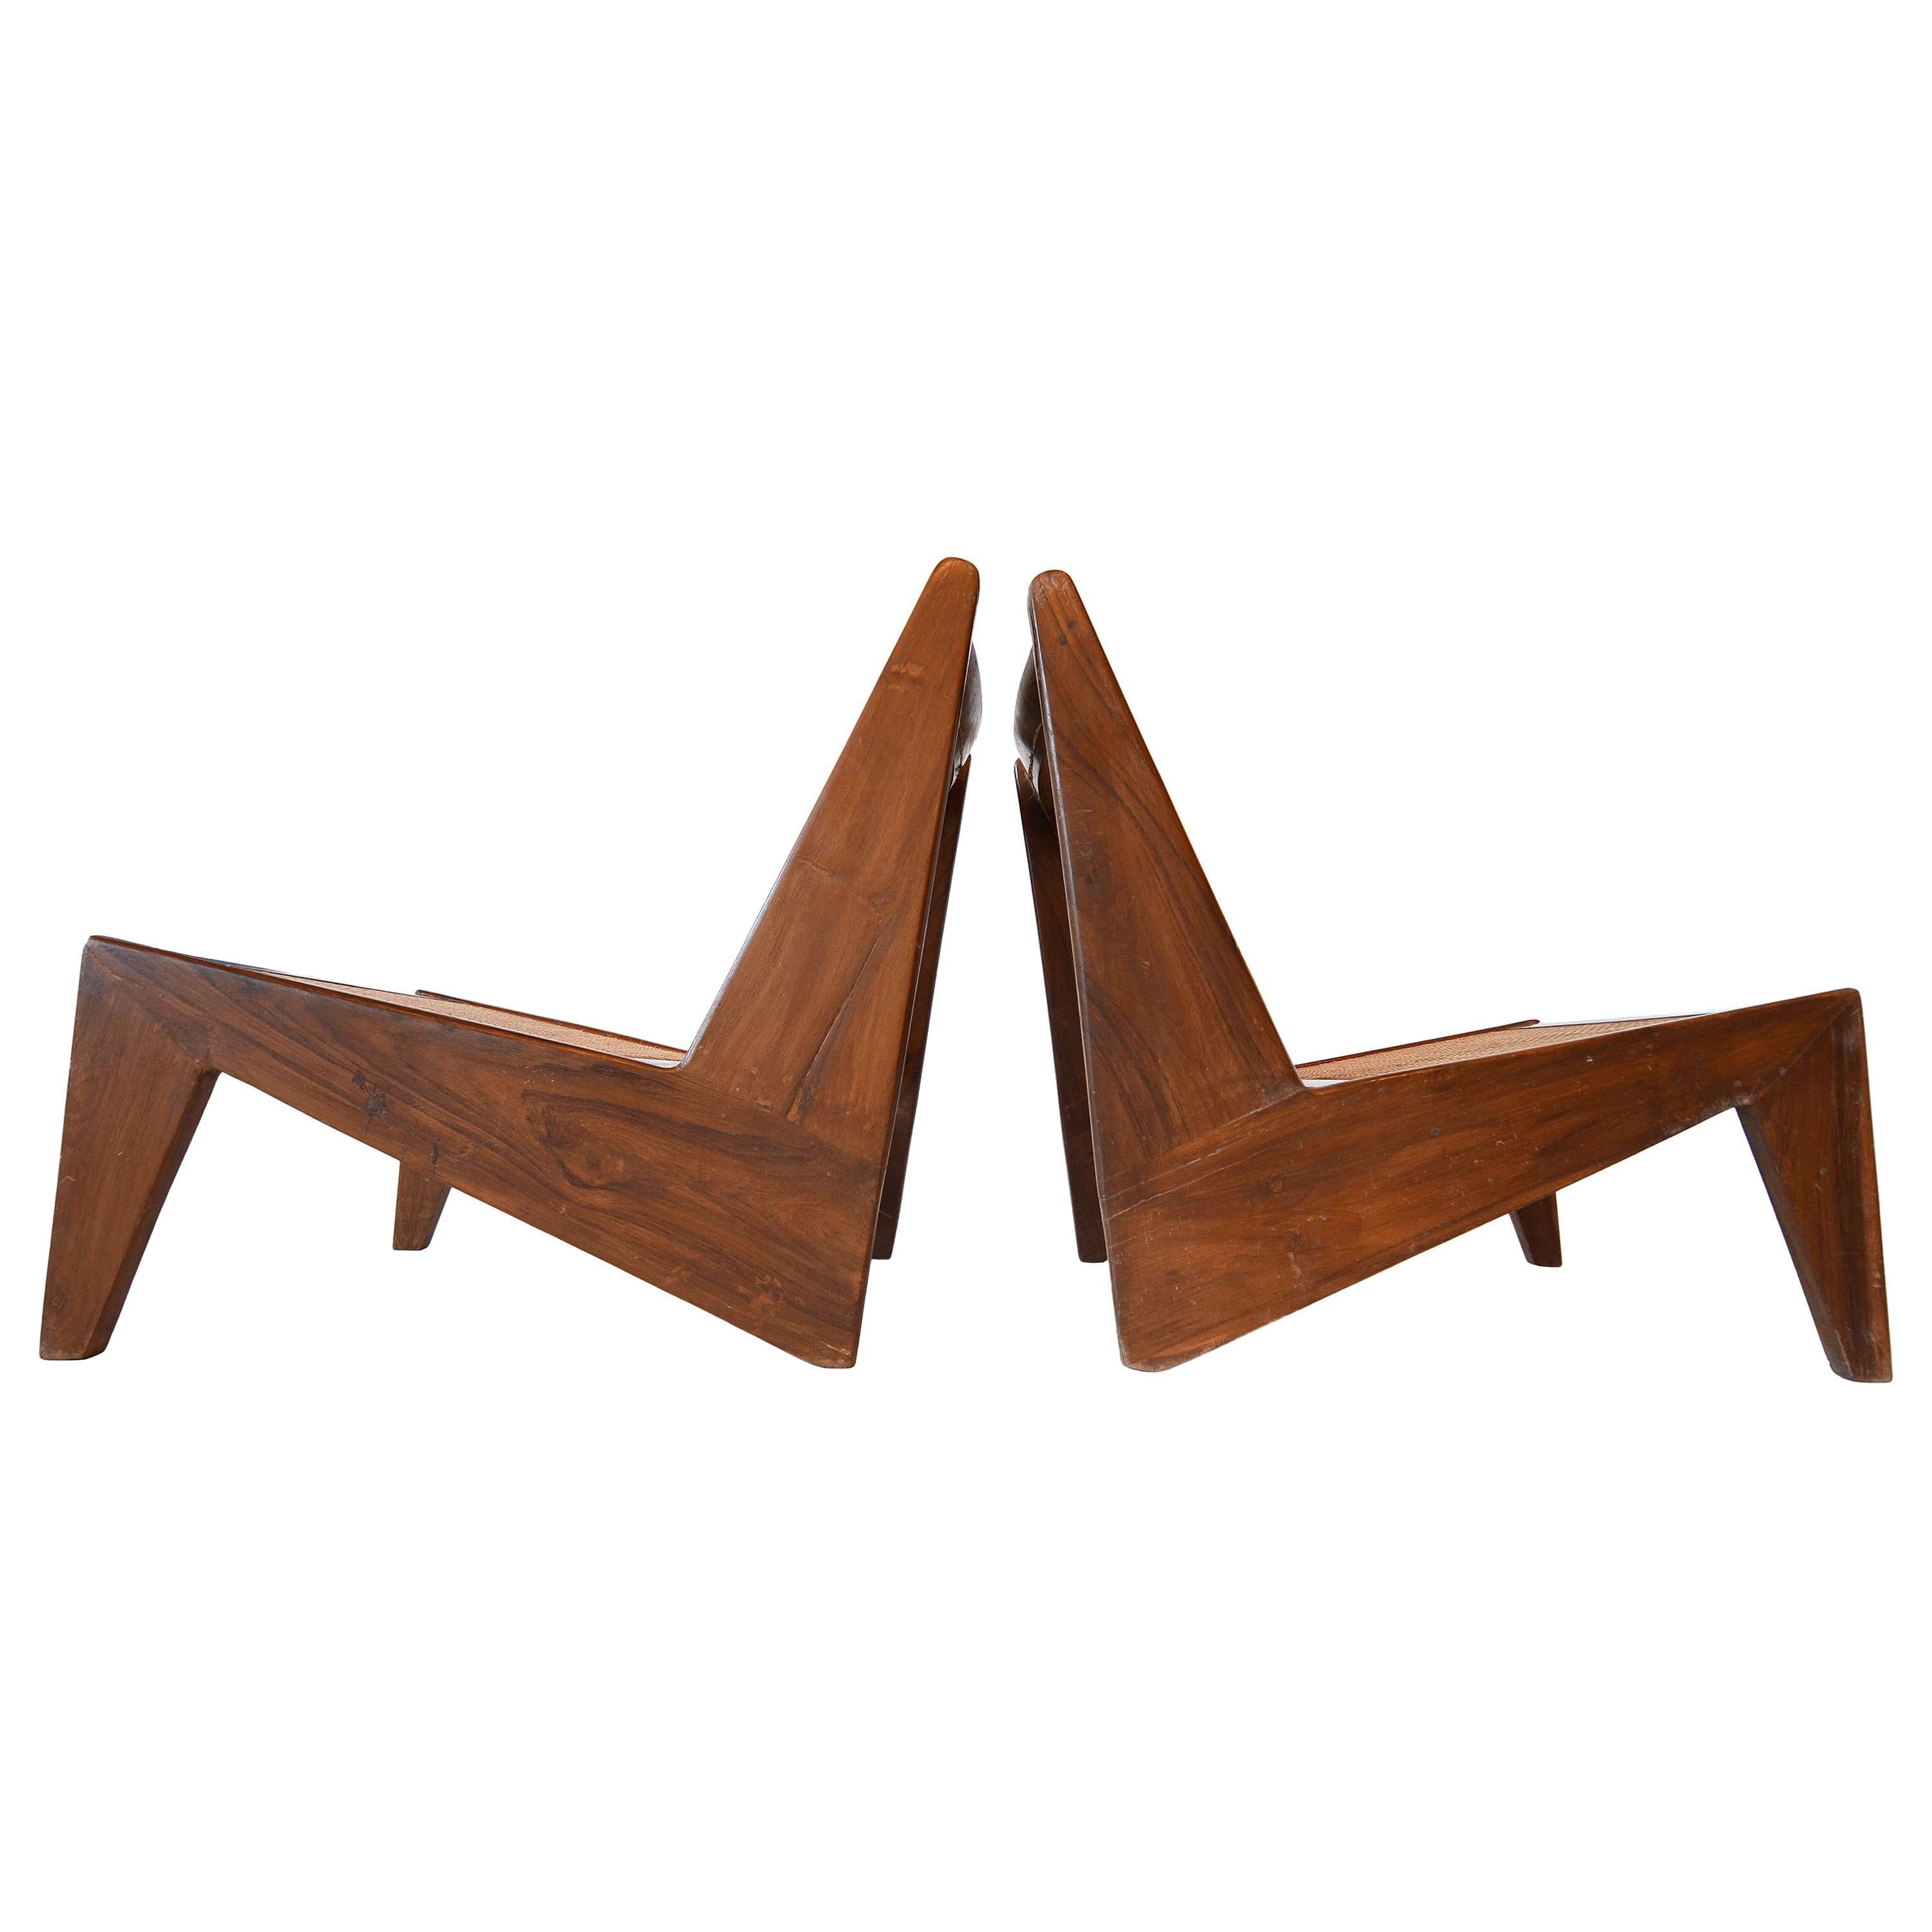 Kangaroo Chairs by Pierre Jeanneret for the Chandigarh Project